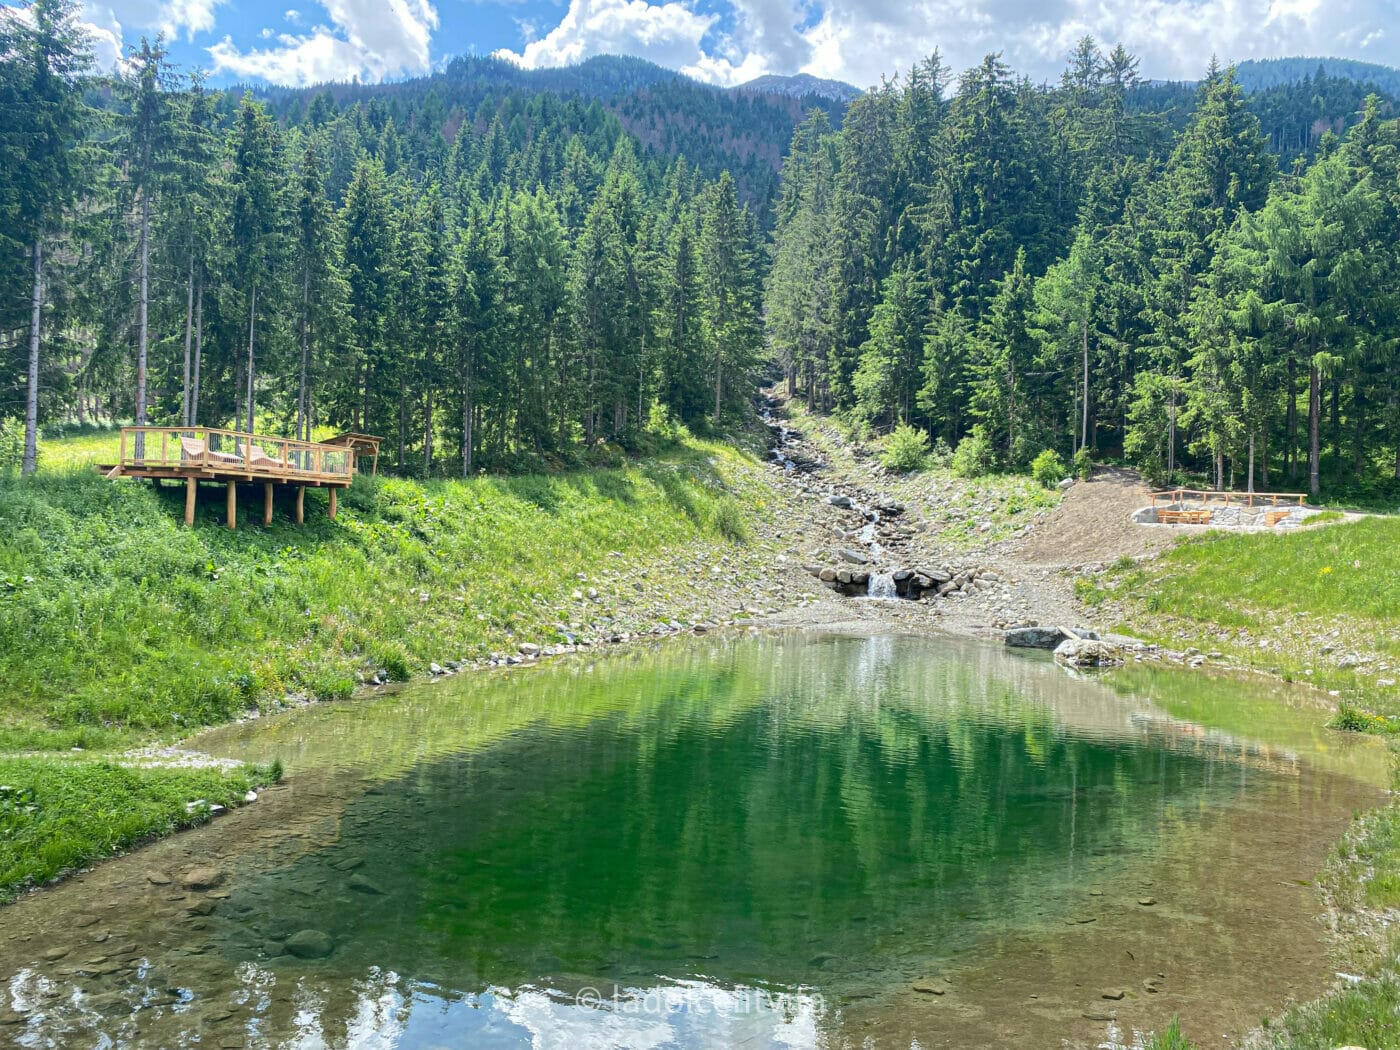 emerald pond and wooden view deck along the Dobbiaco Lienz cycling Route that crosses the Italian-Austrian border